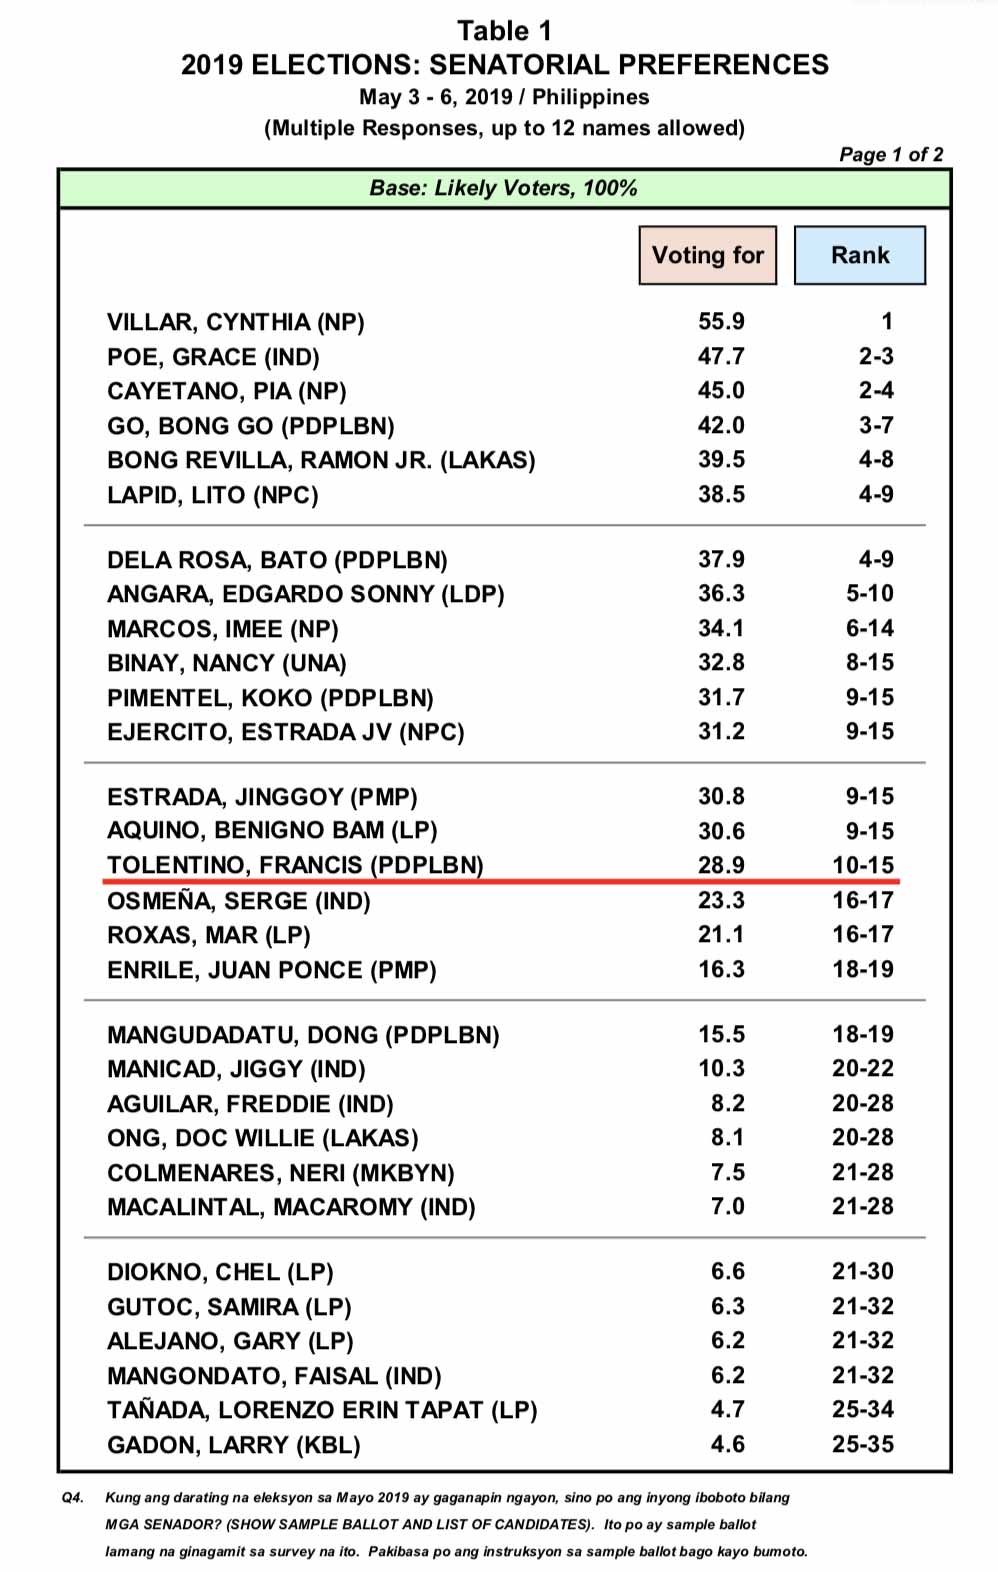 Table from Pulse Asia Research, Inc 